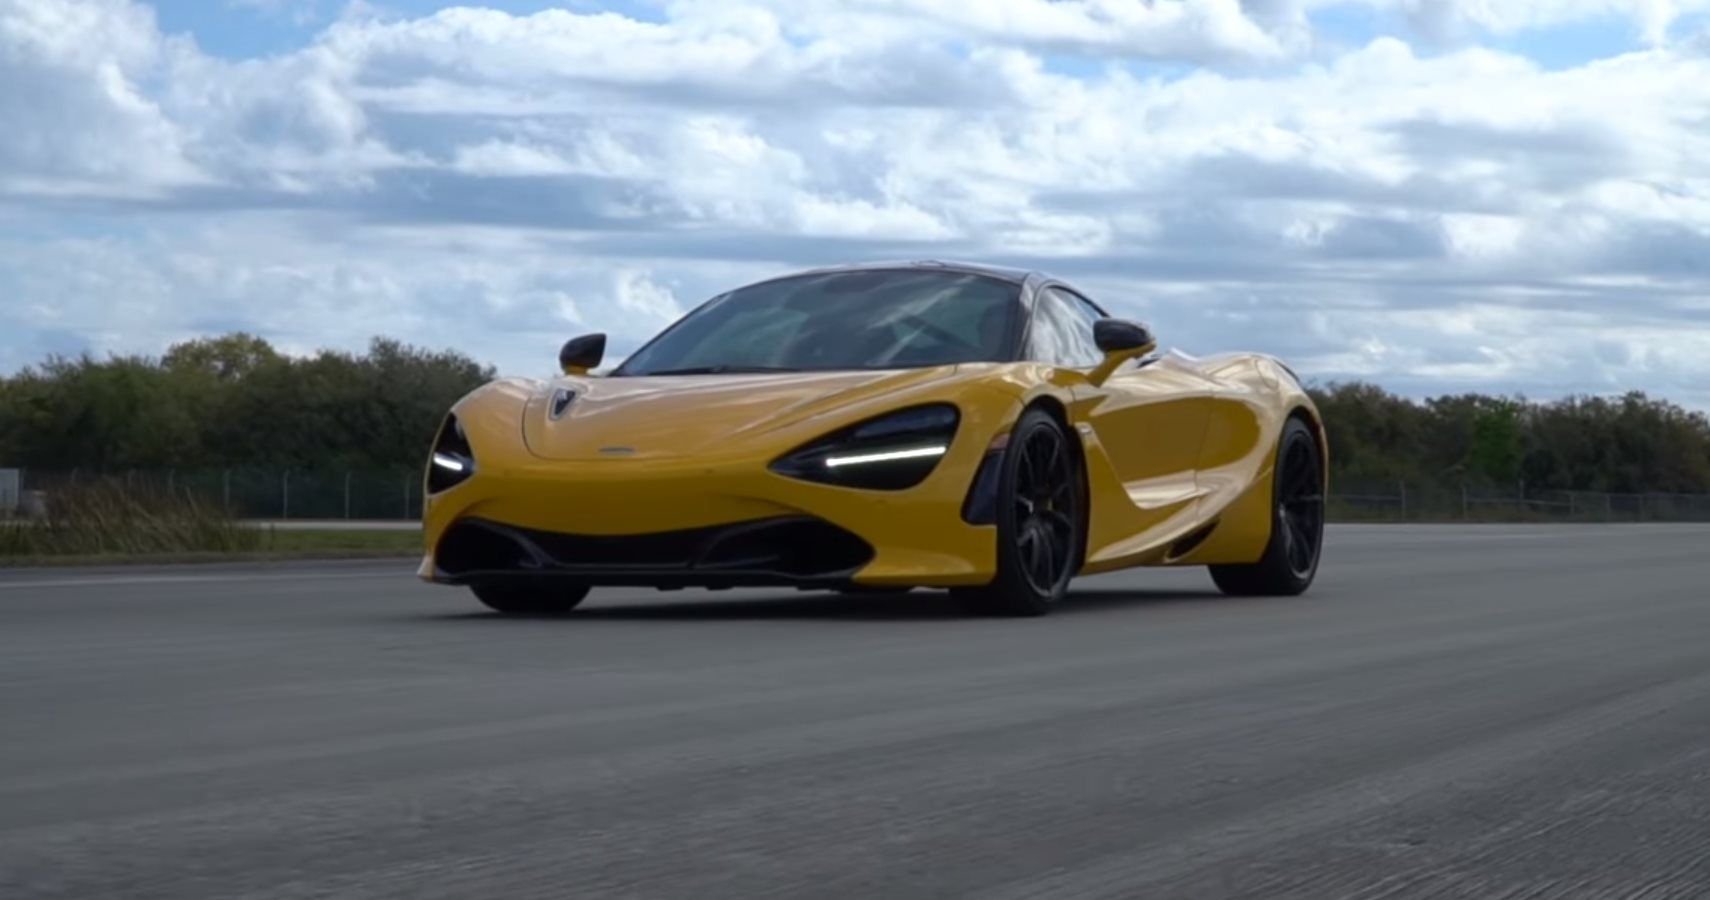 McLaren 720S Reaches For Its Max Speed Of 212 MPH In Standing Mile Run